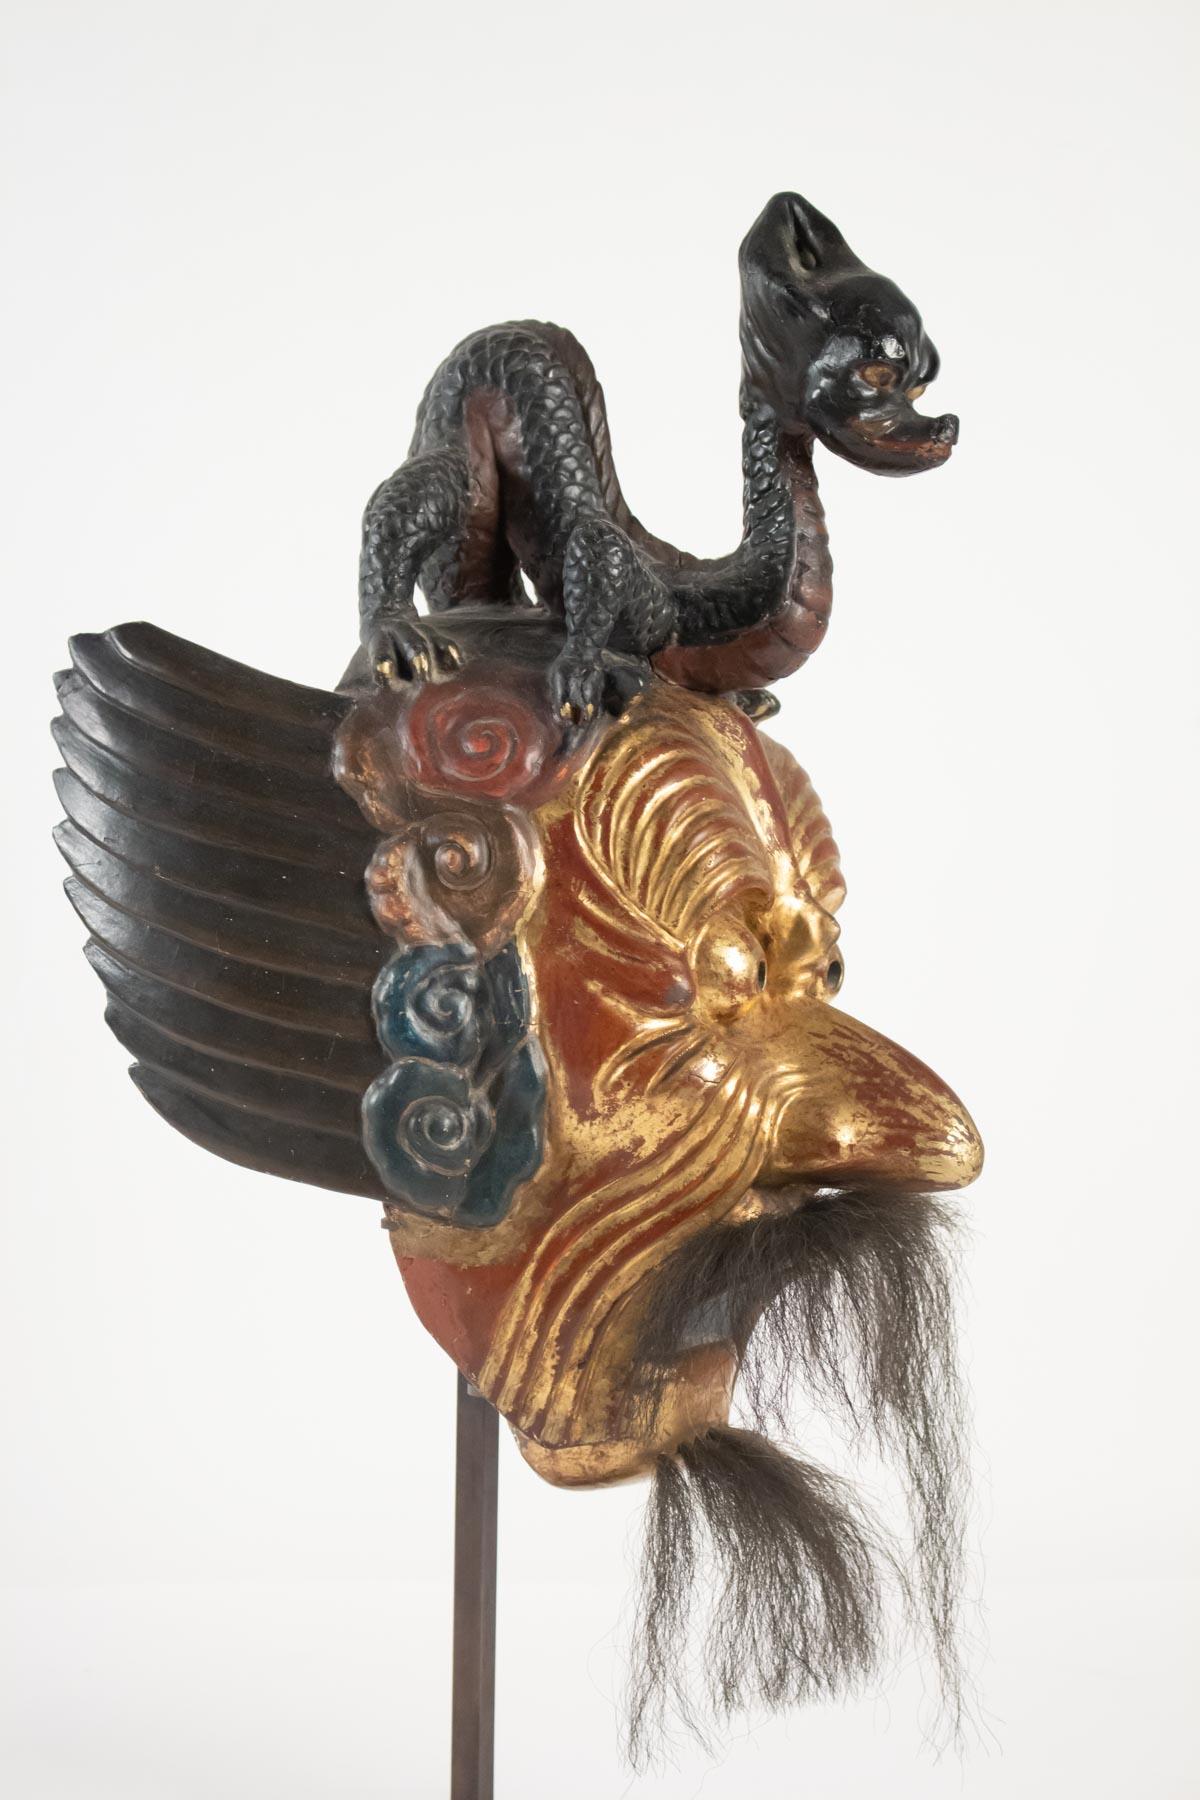 Polychromed Gilded Wood Mask, Polychrome, Japan, Says of the Imperial Dance of Bugaku Dances